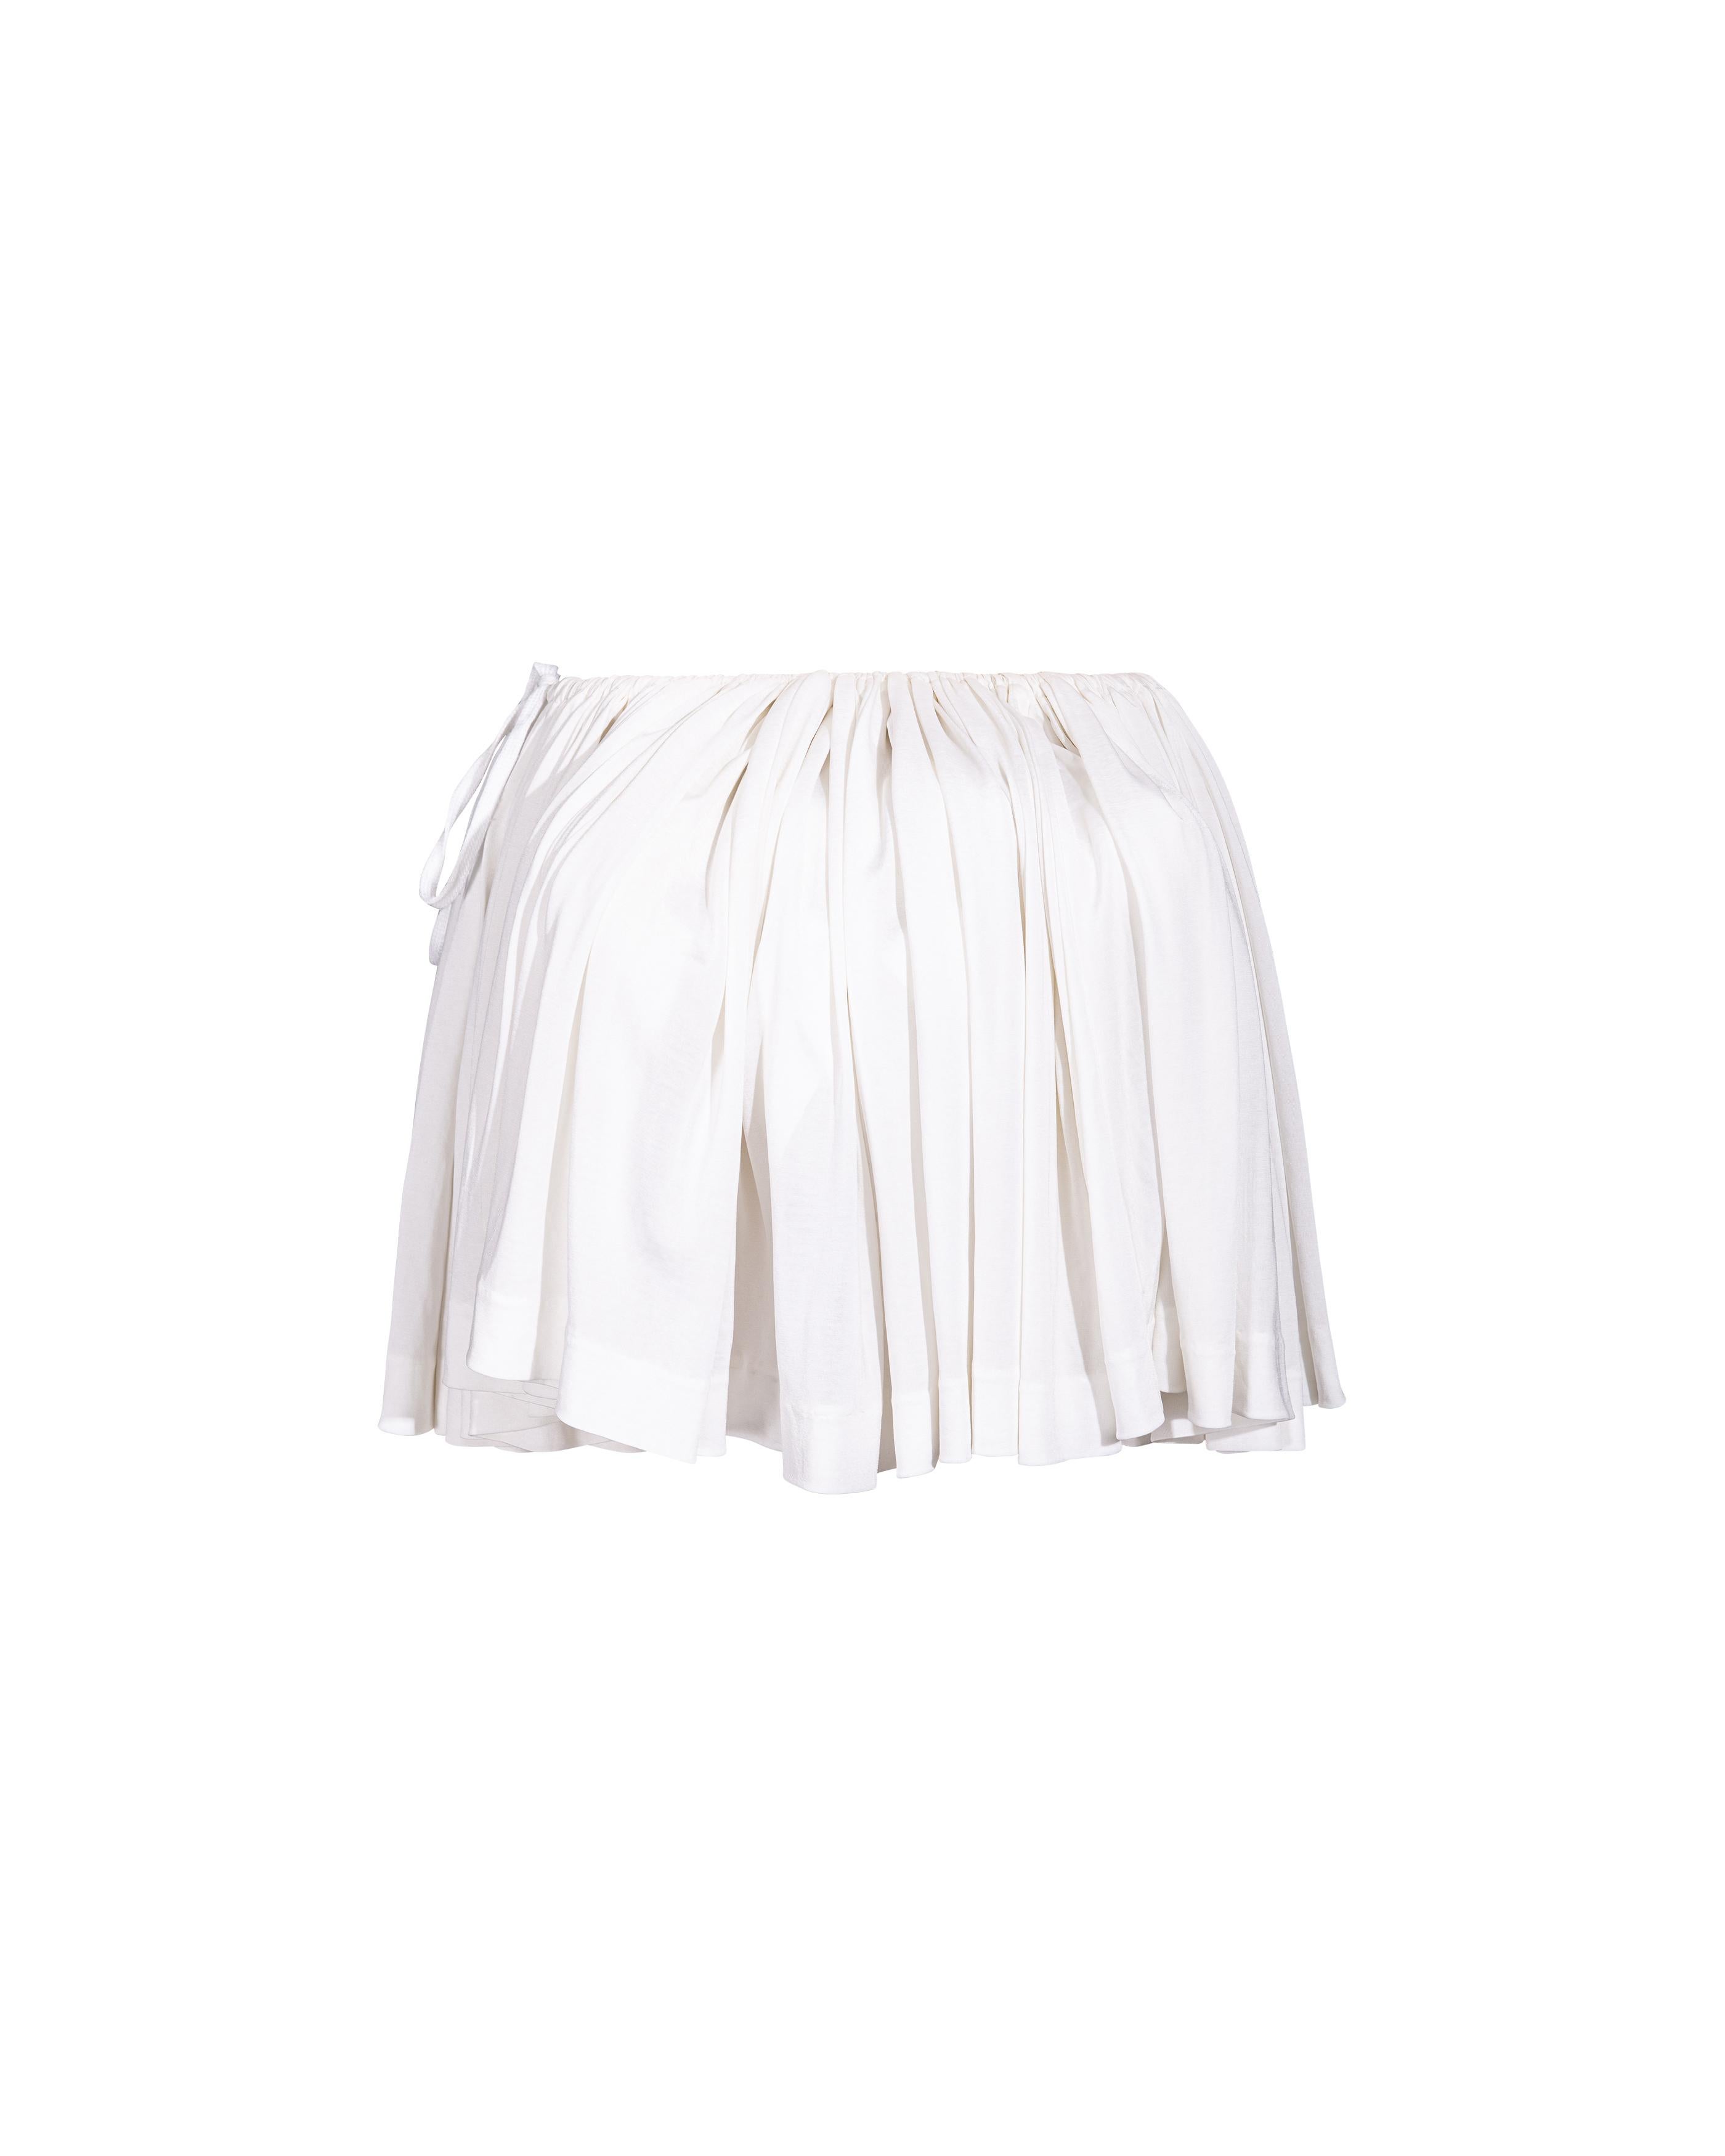 S/S 1988 Vivienne Westwood White Mini Skirt with Removable Bustle 1